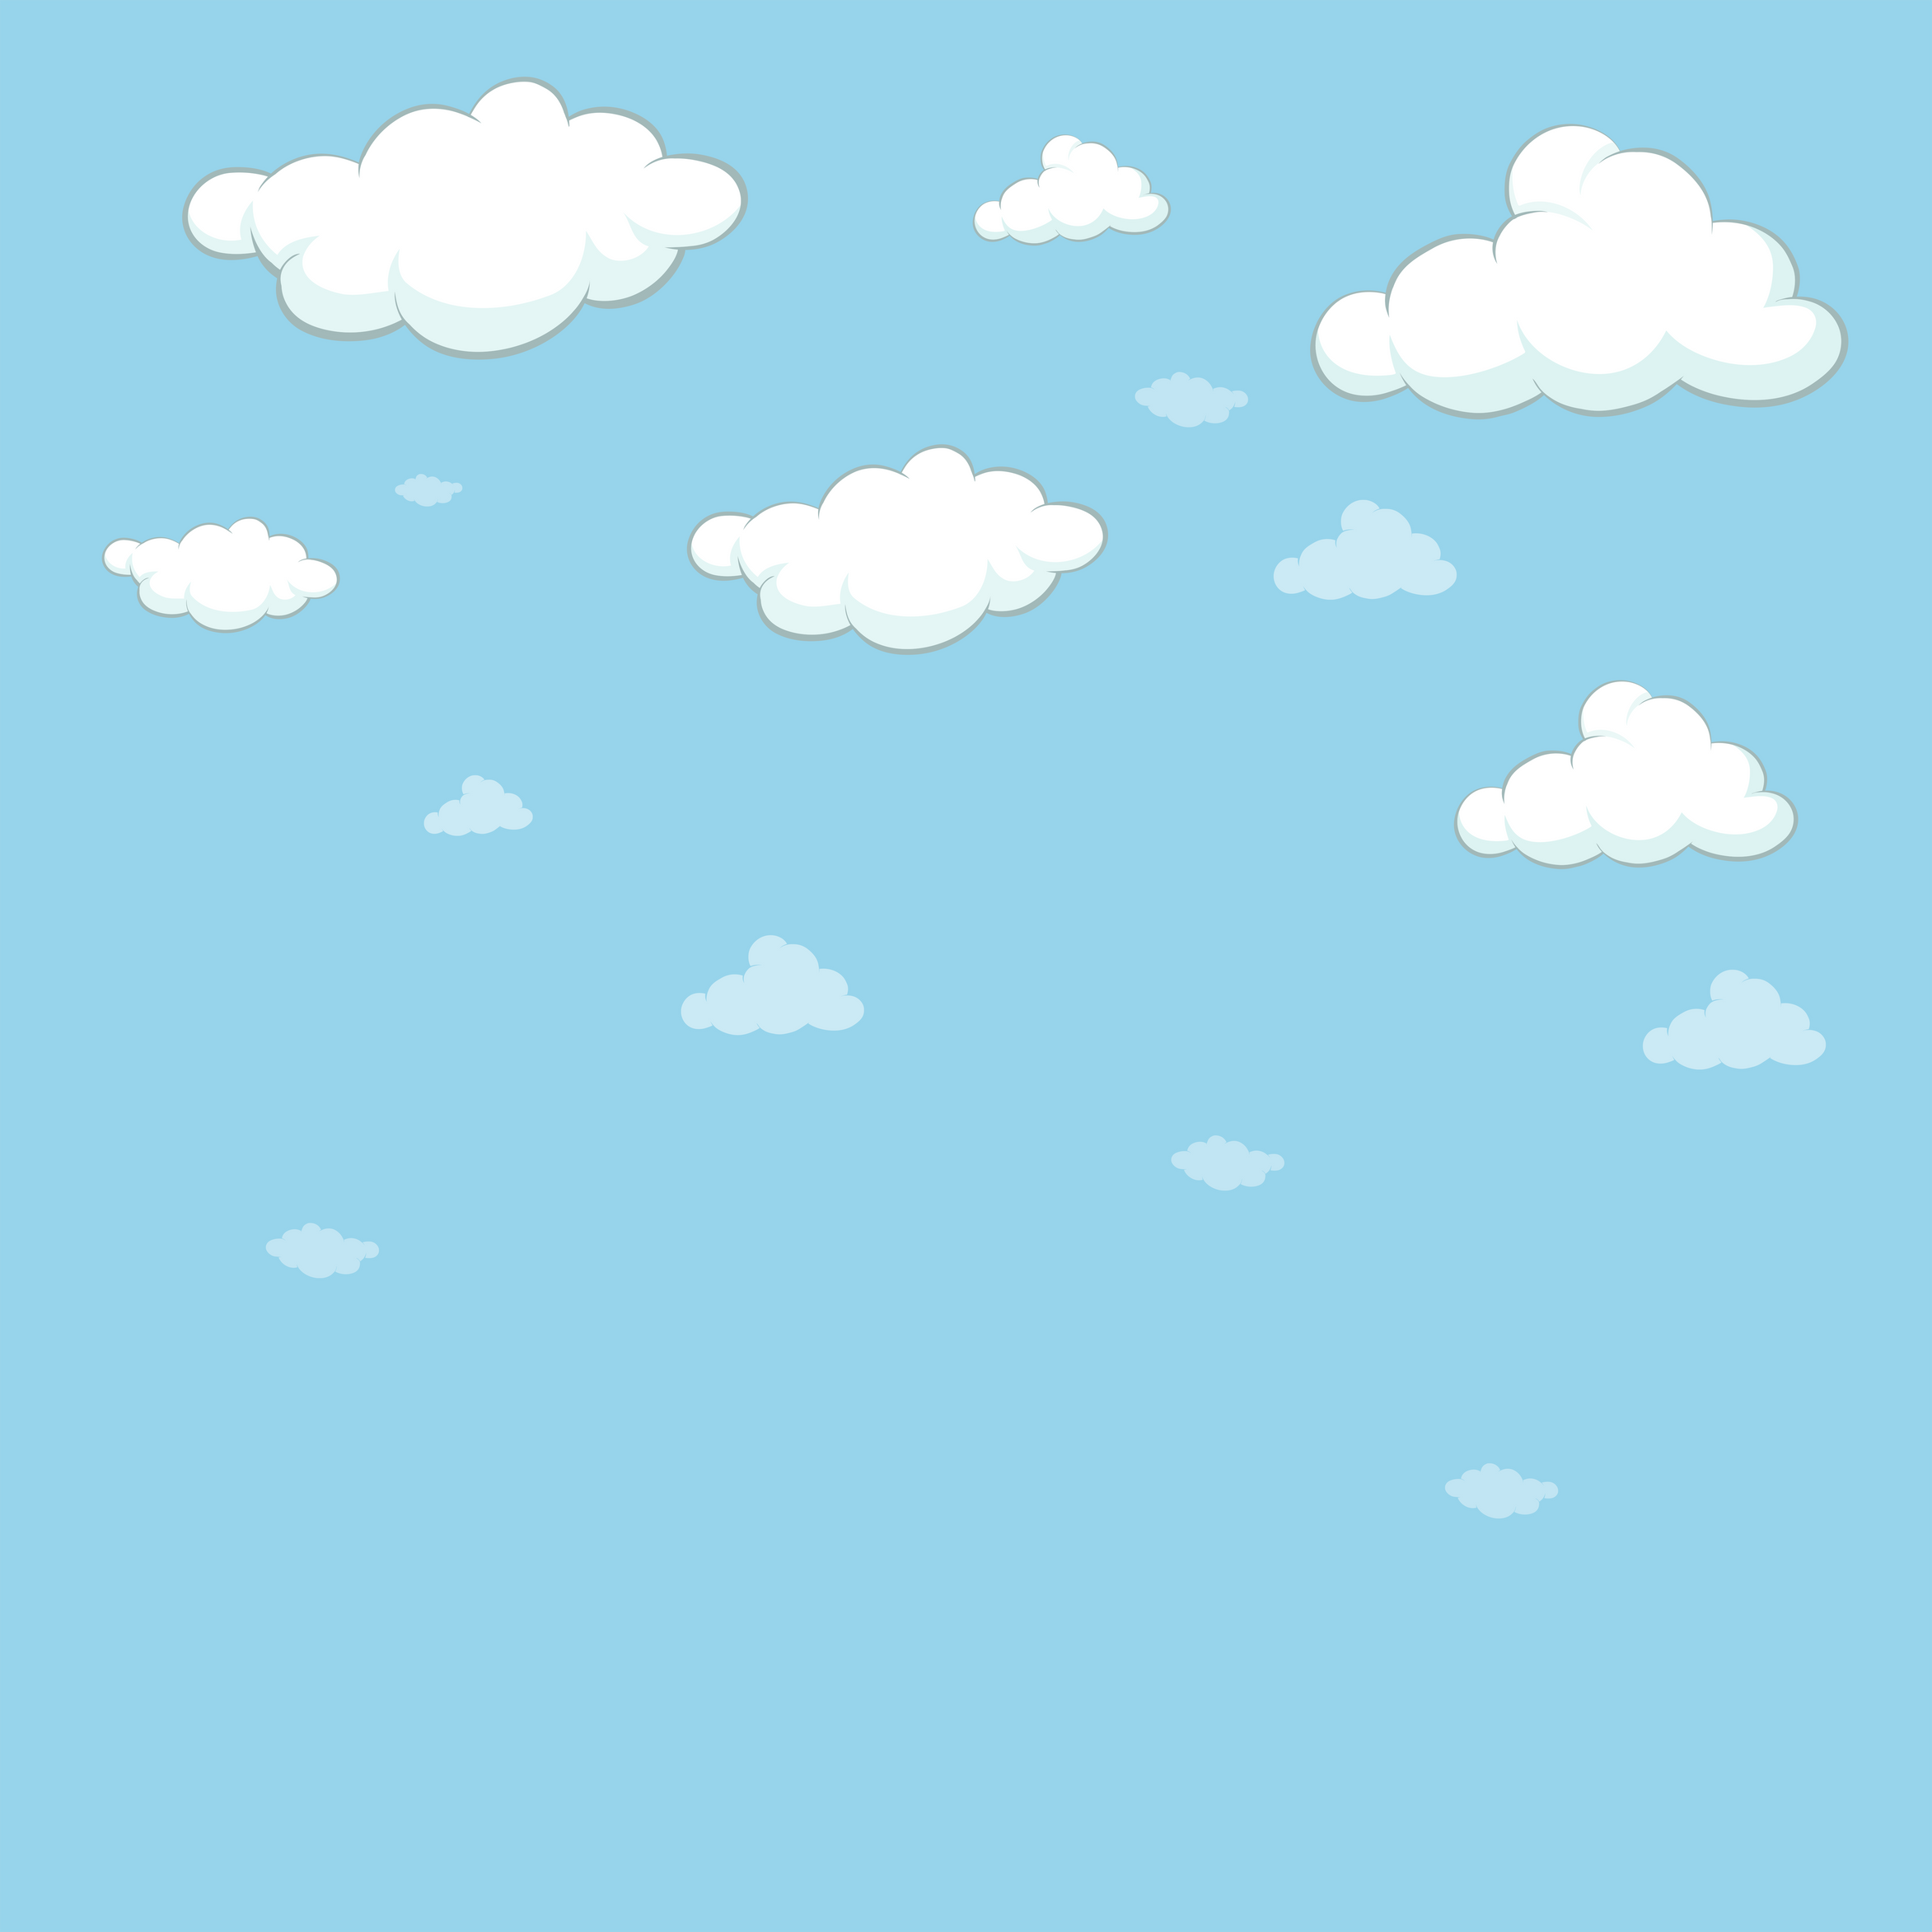 Background template with blue sky